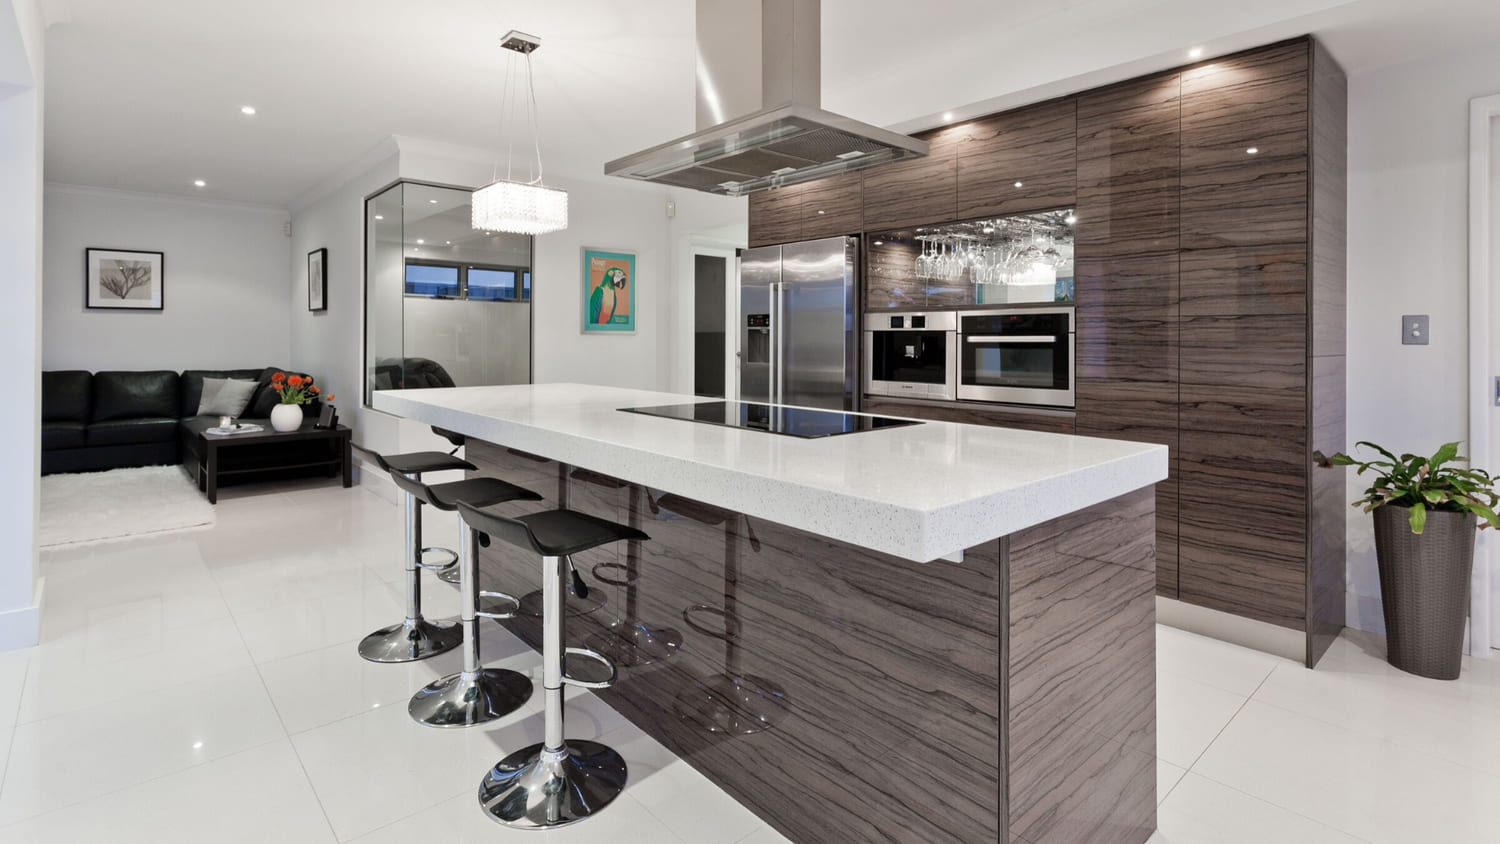 A shiny kitchen with nice white tile floors